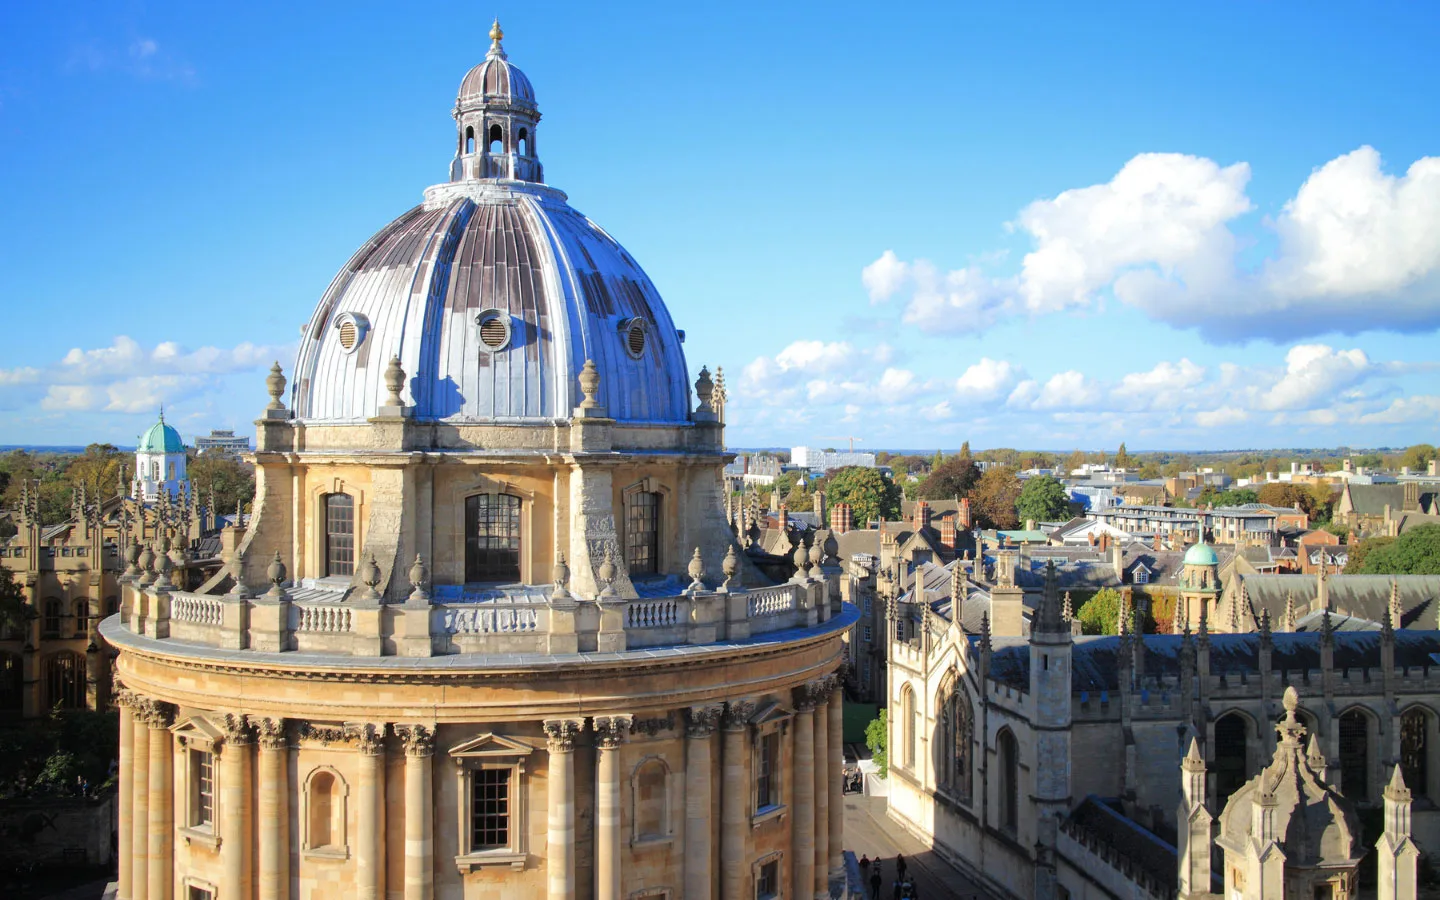 The Radcliffe Camera in Oxford [photo credit Canva]